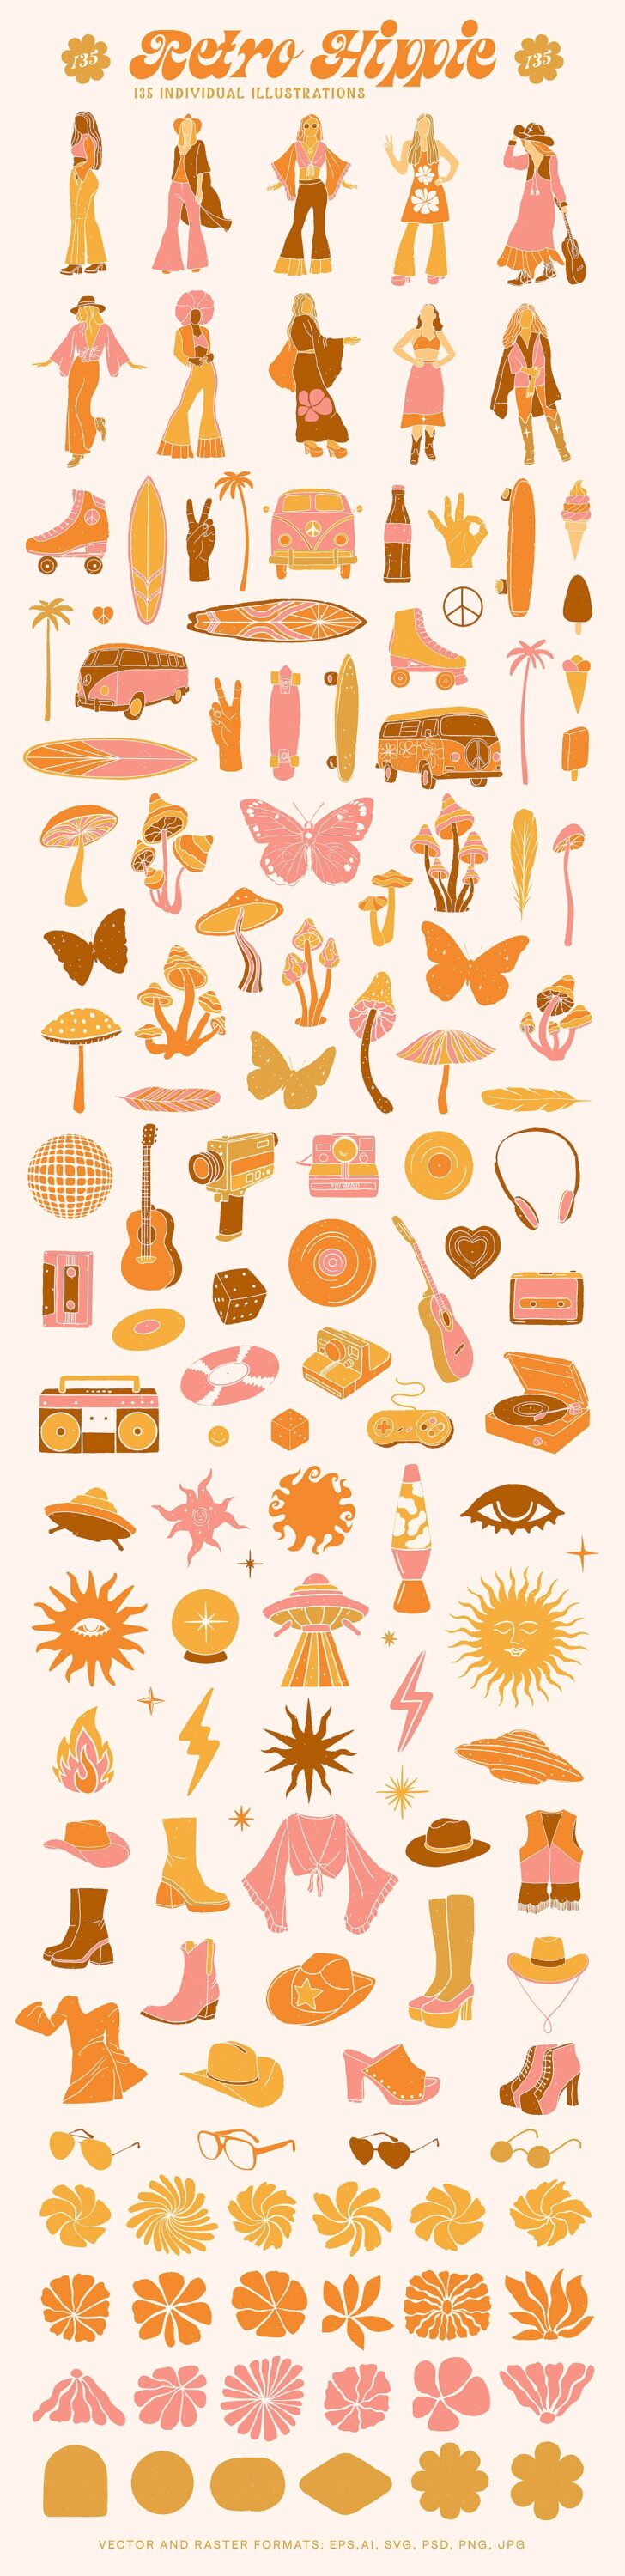 Beautiful objects on the theme of retro style.